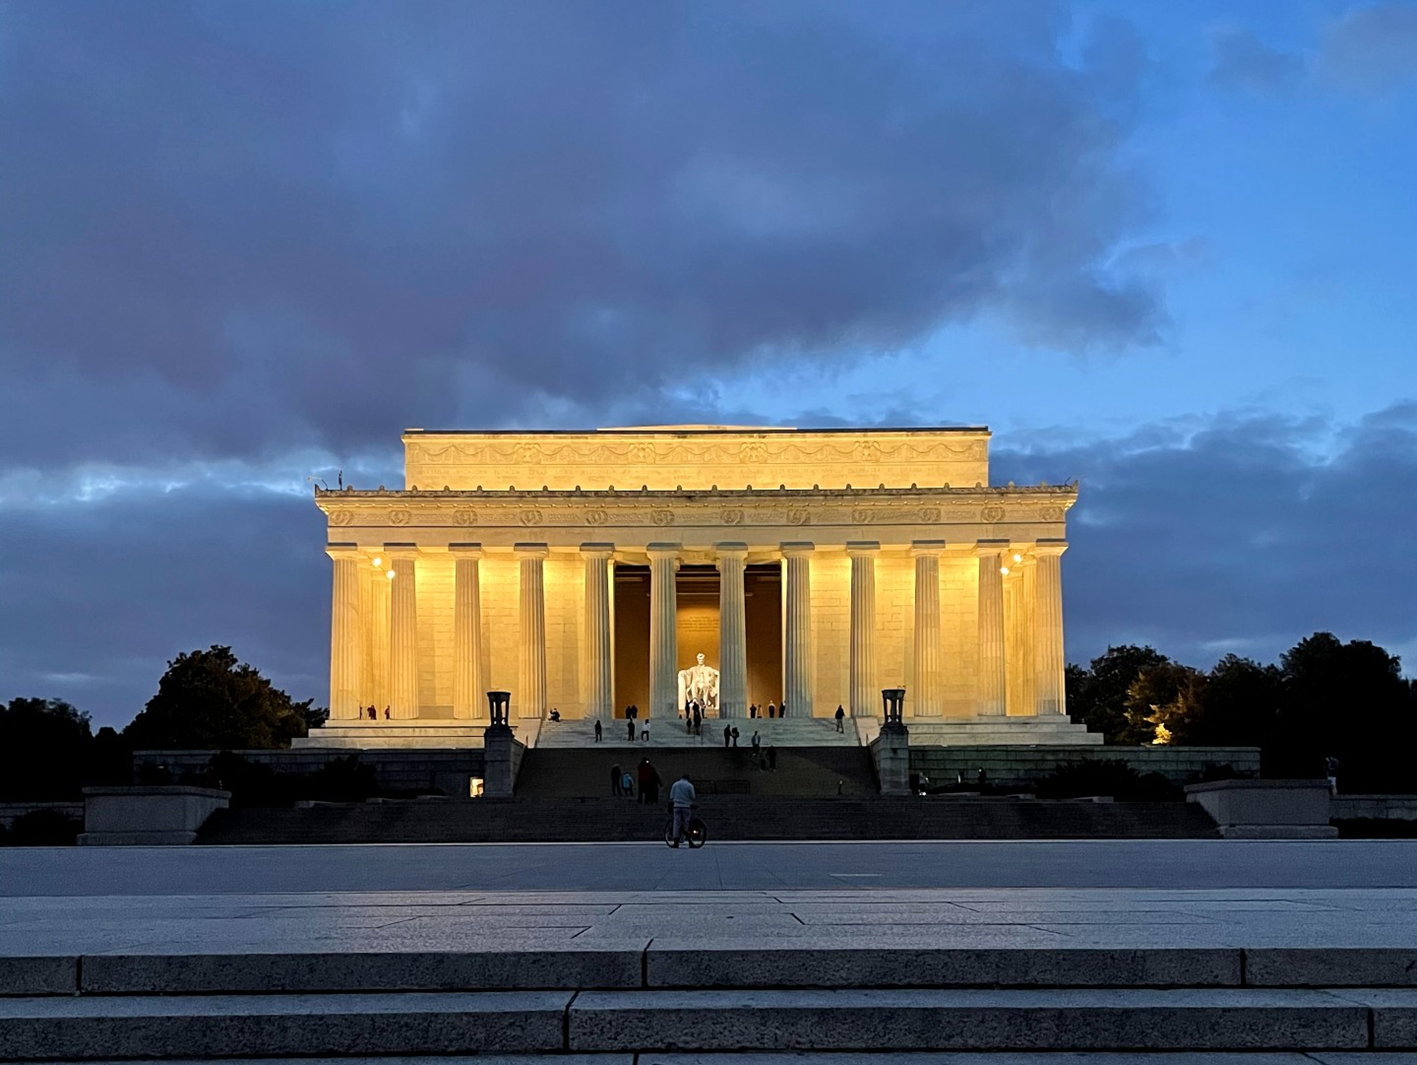 The Lincoln Memorial lit up at night.